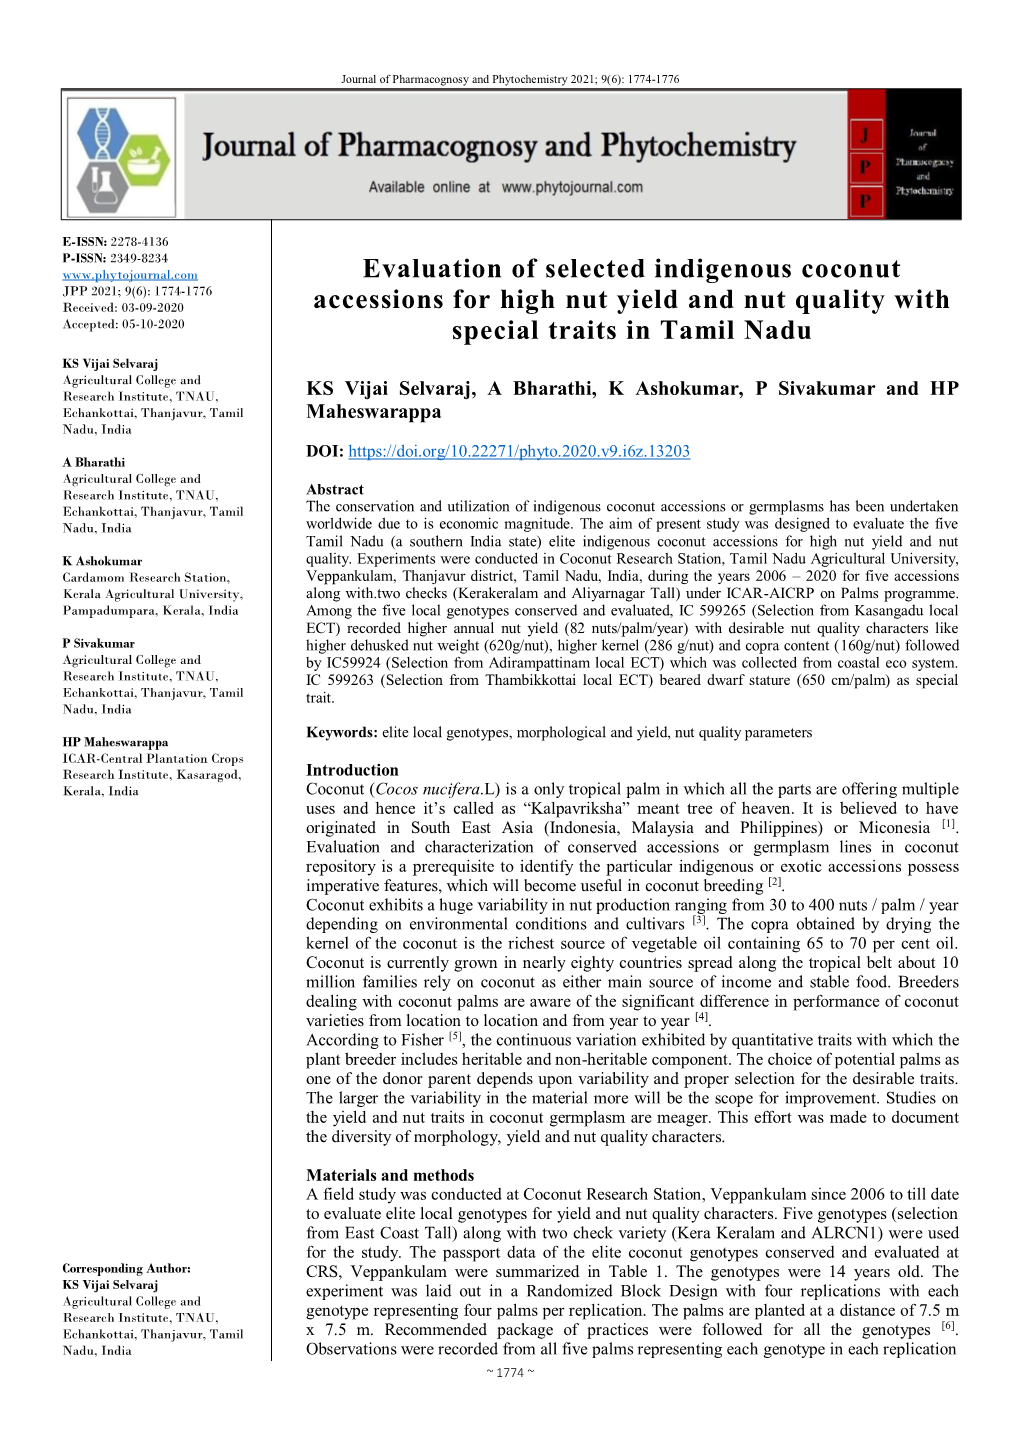 Evaluation of Selected Indigenous Coconut Accessions for High Nut